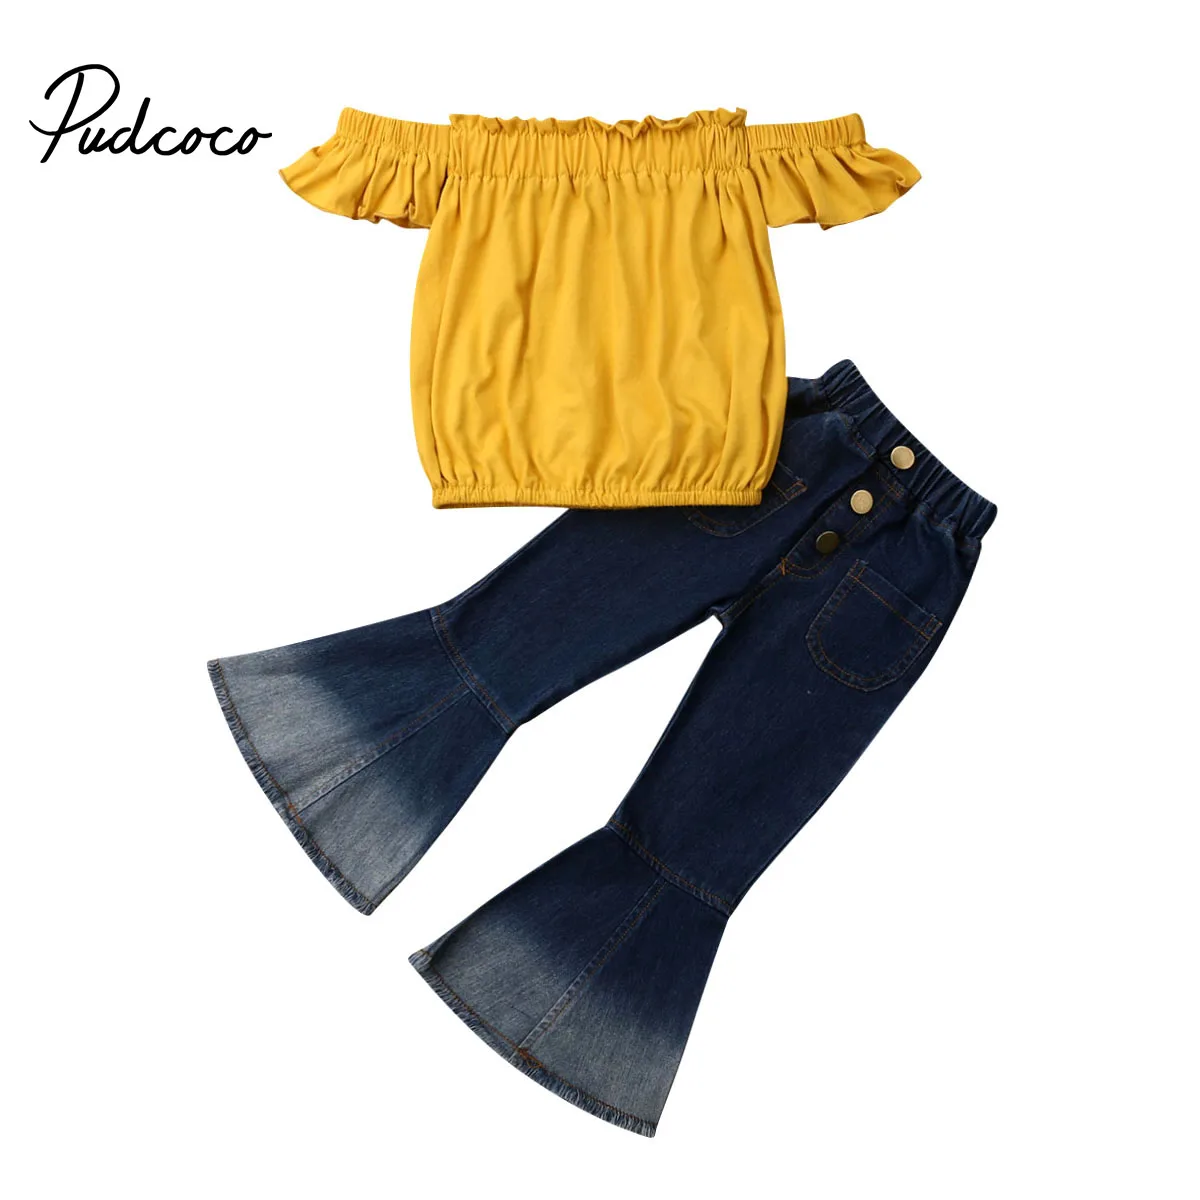 Pudcoco 2pcs Newborn Kid Baby Girls Clothes Off Shoulder Tops Denim ell-Bottoms Pants Flared Pants  Summer Outfits Clothes Set